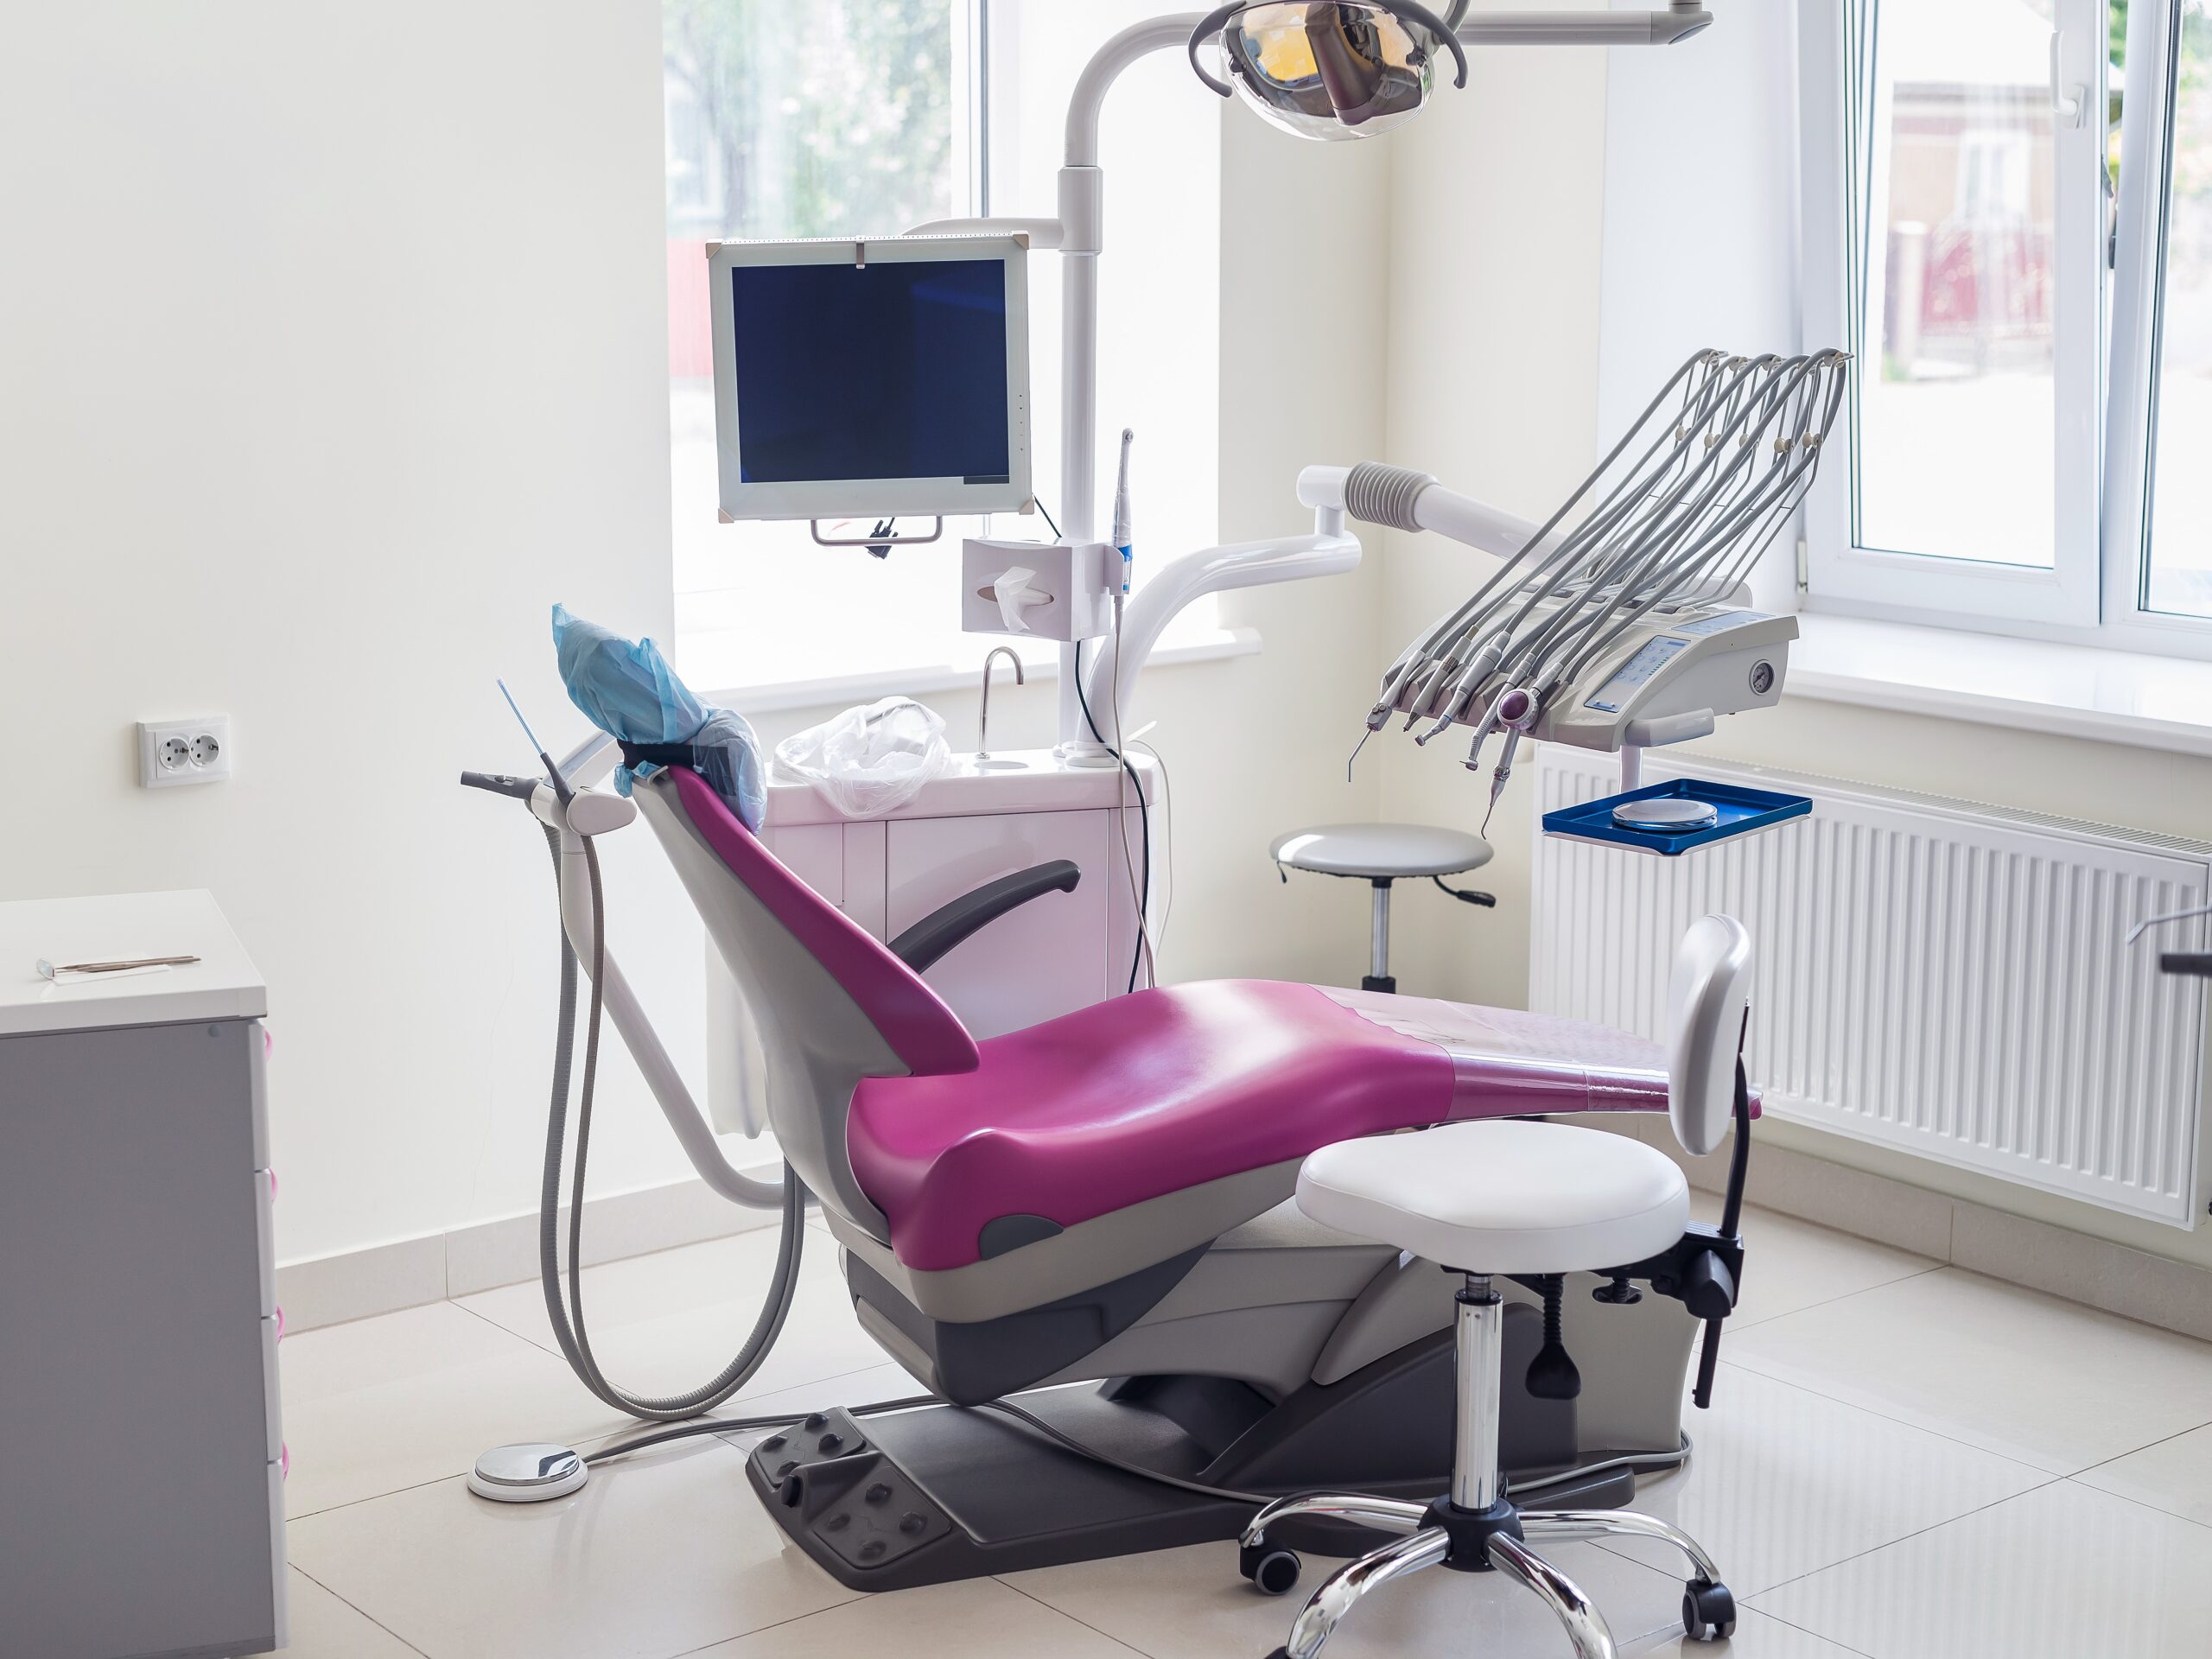 Dentistry inside, violet chair for patient and equipment